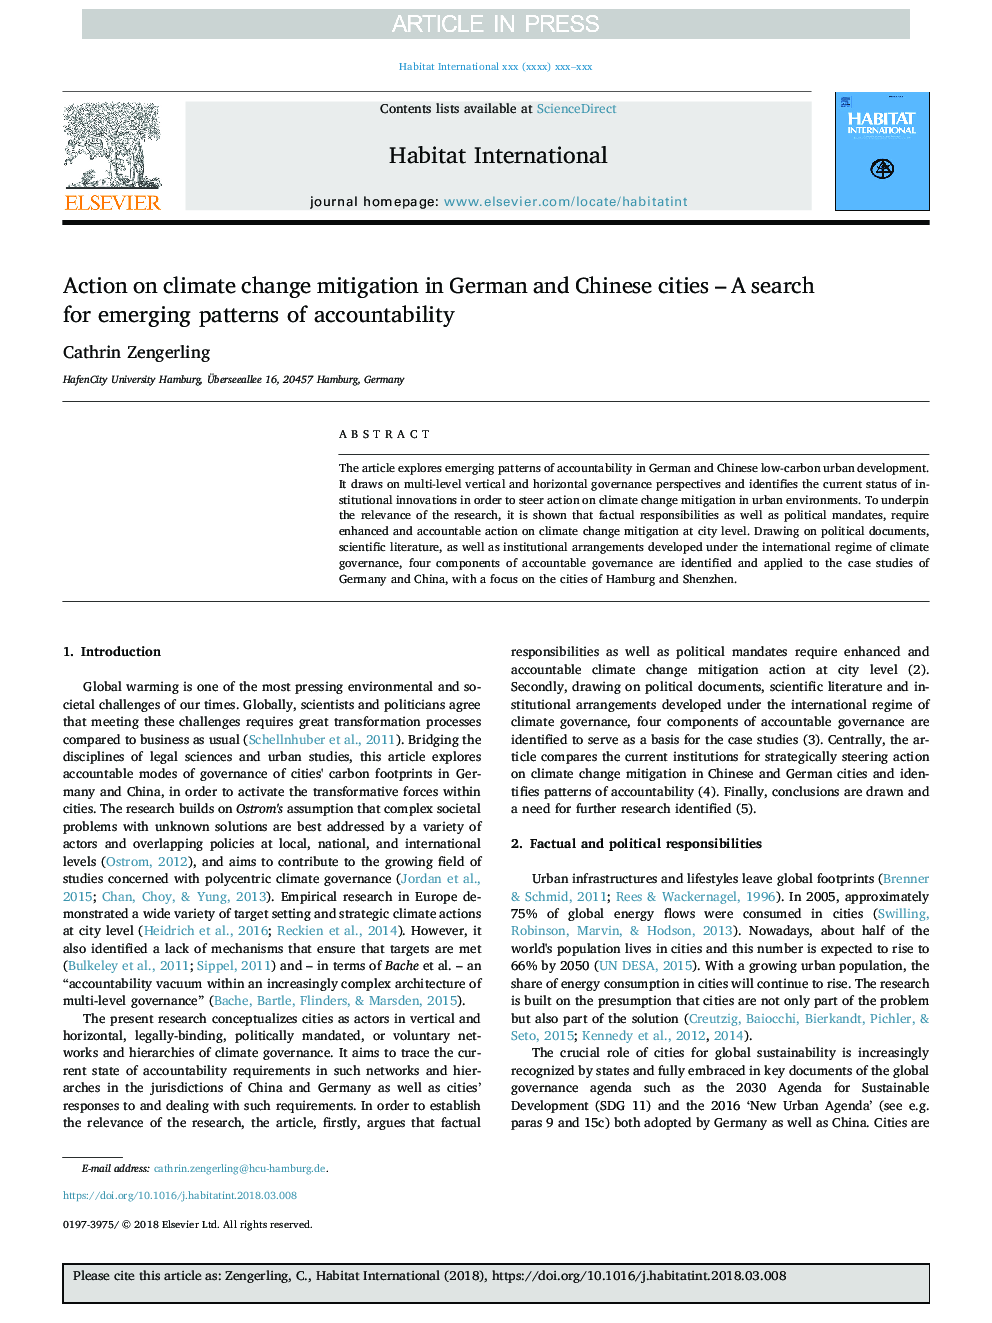 Action on climate change mitigation in German and Chinese cities - A search for emerging patterns of accountability